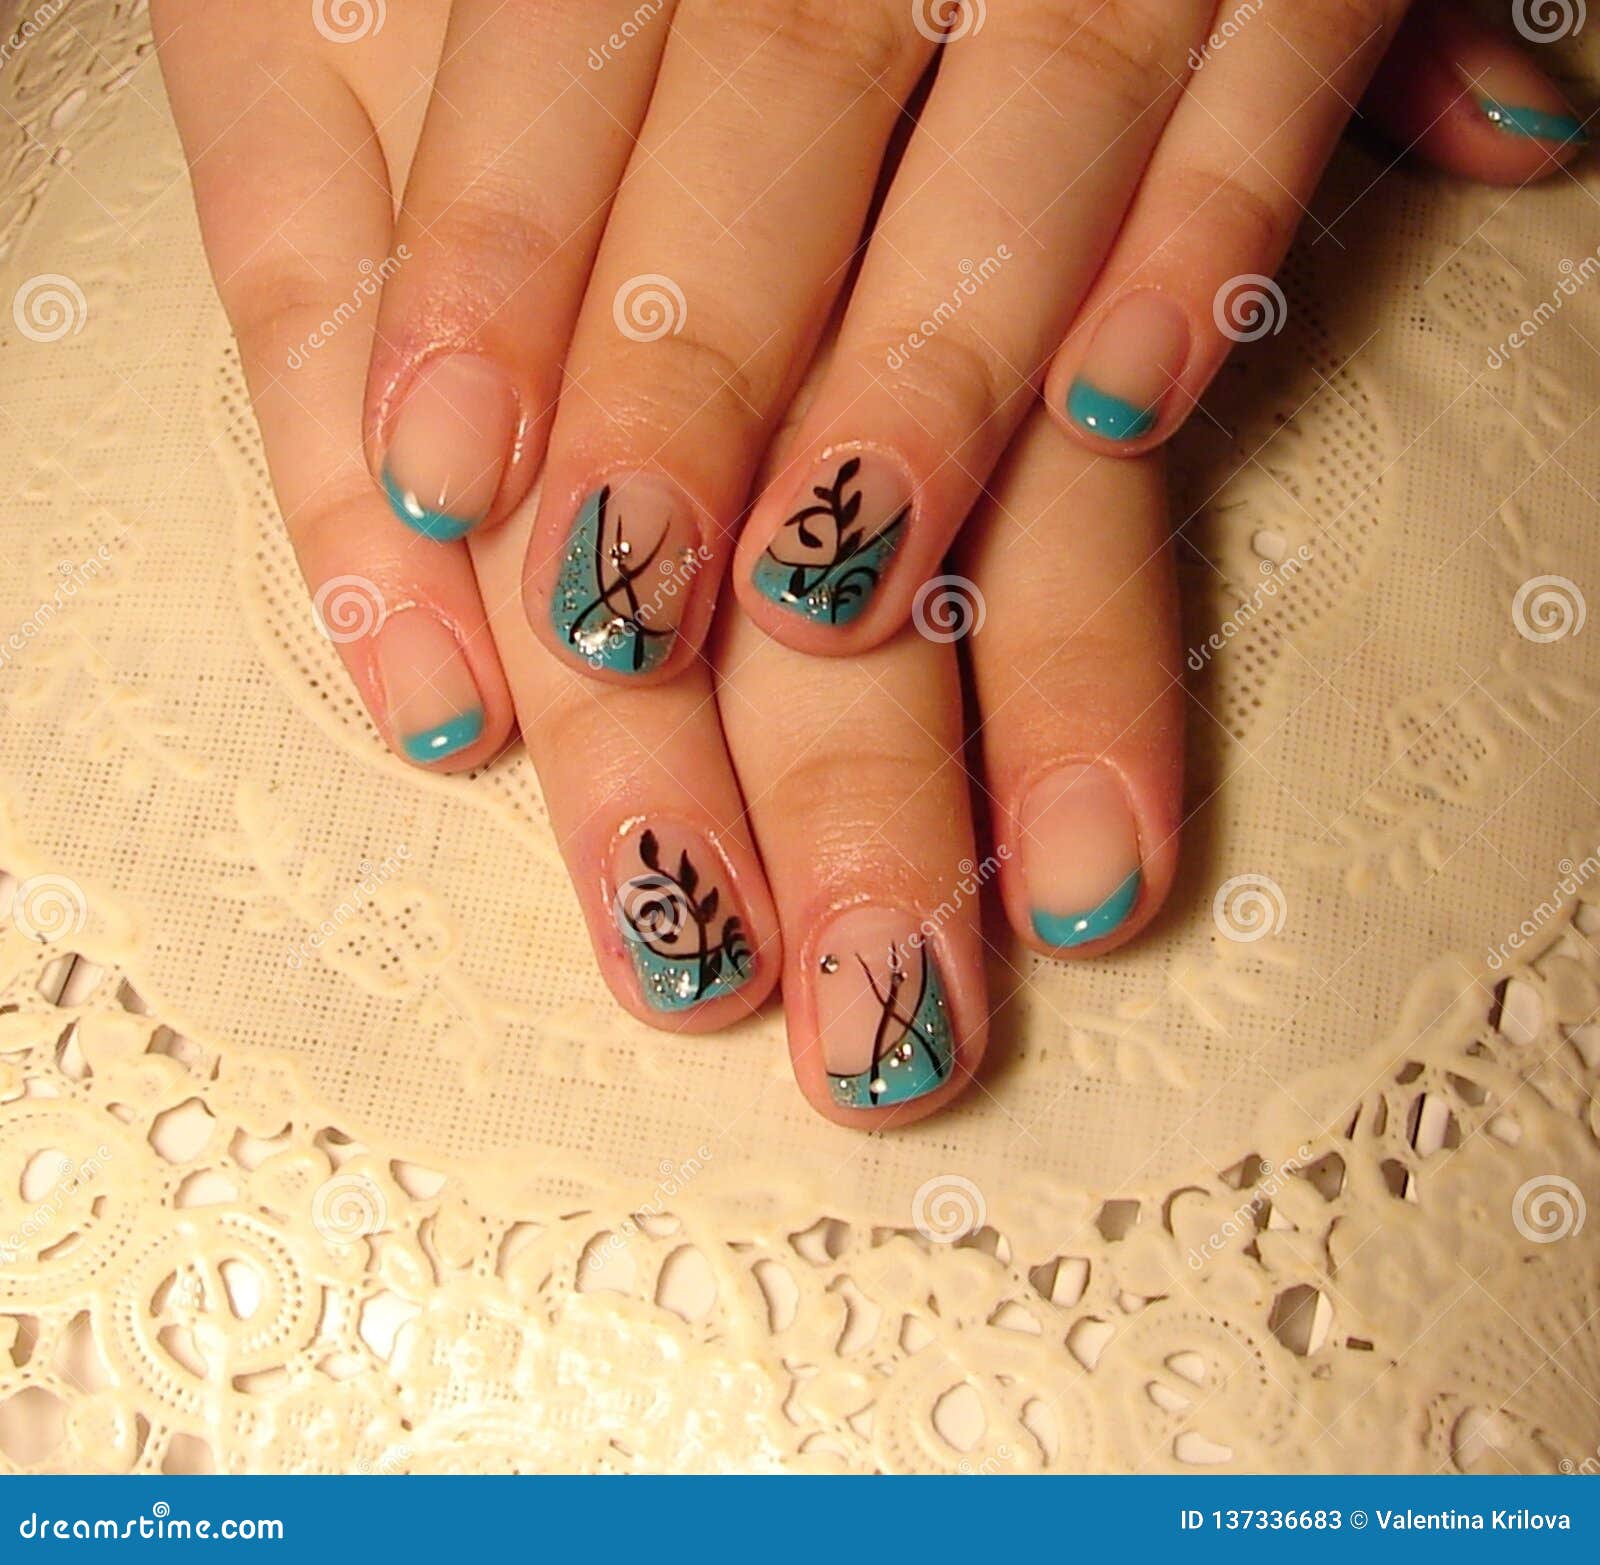 Turquoise Manicure with a Pattern. Stock Image - Image of kremlin, gray:  137336683